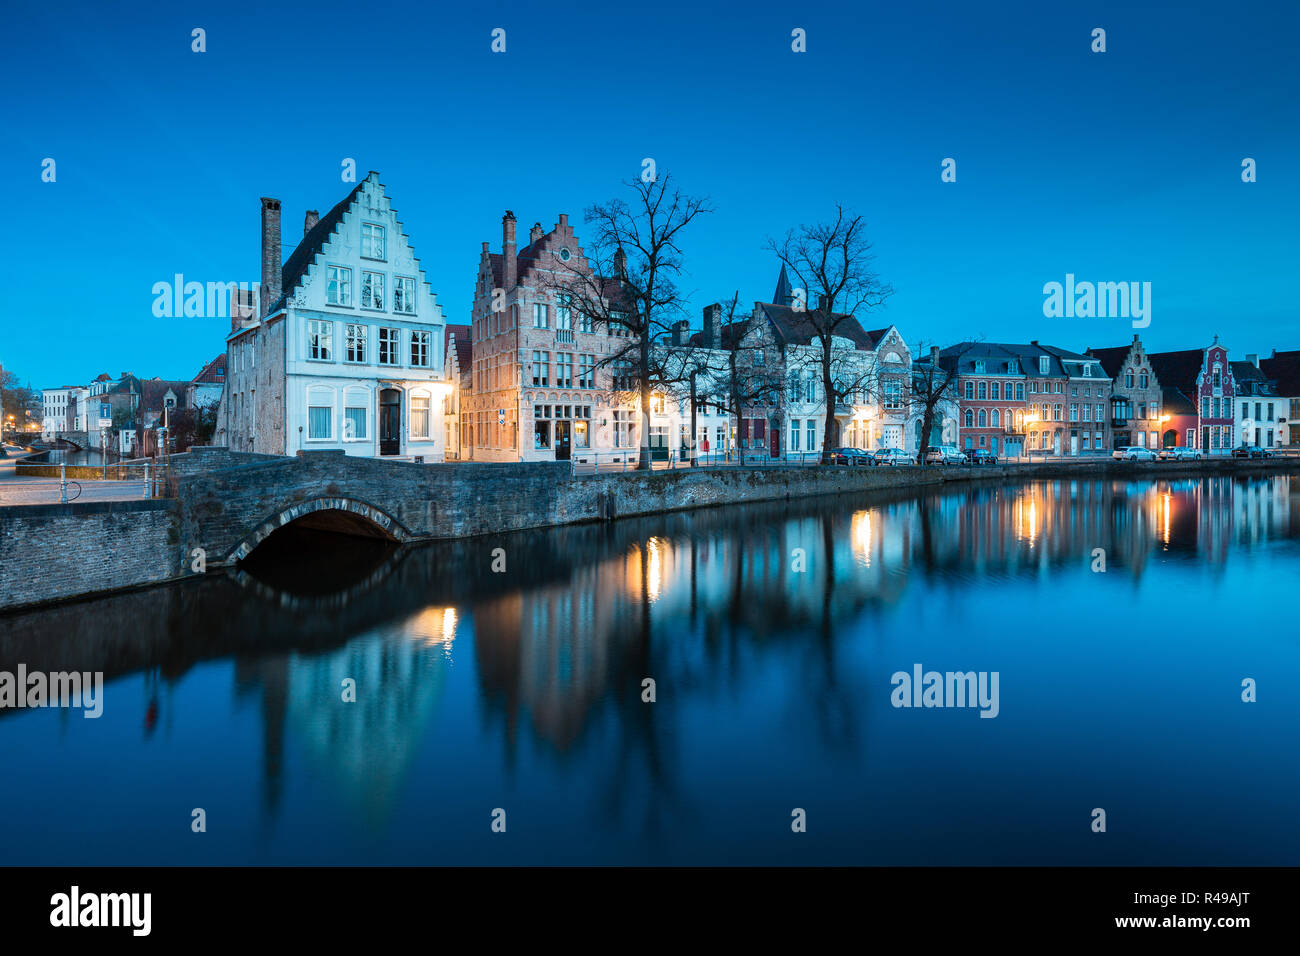 Beautiful twilight view of the historic city center of Brugge with old houses along famous Potterierei canal illuminated during blue hour at dusk, Bru Stock Photo